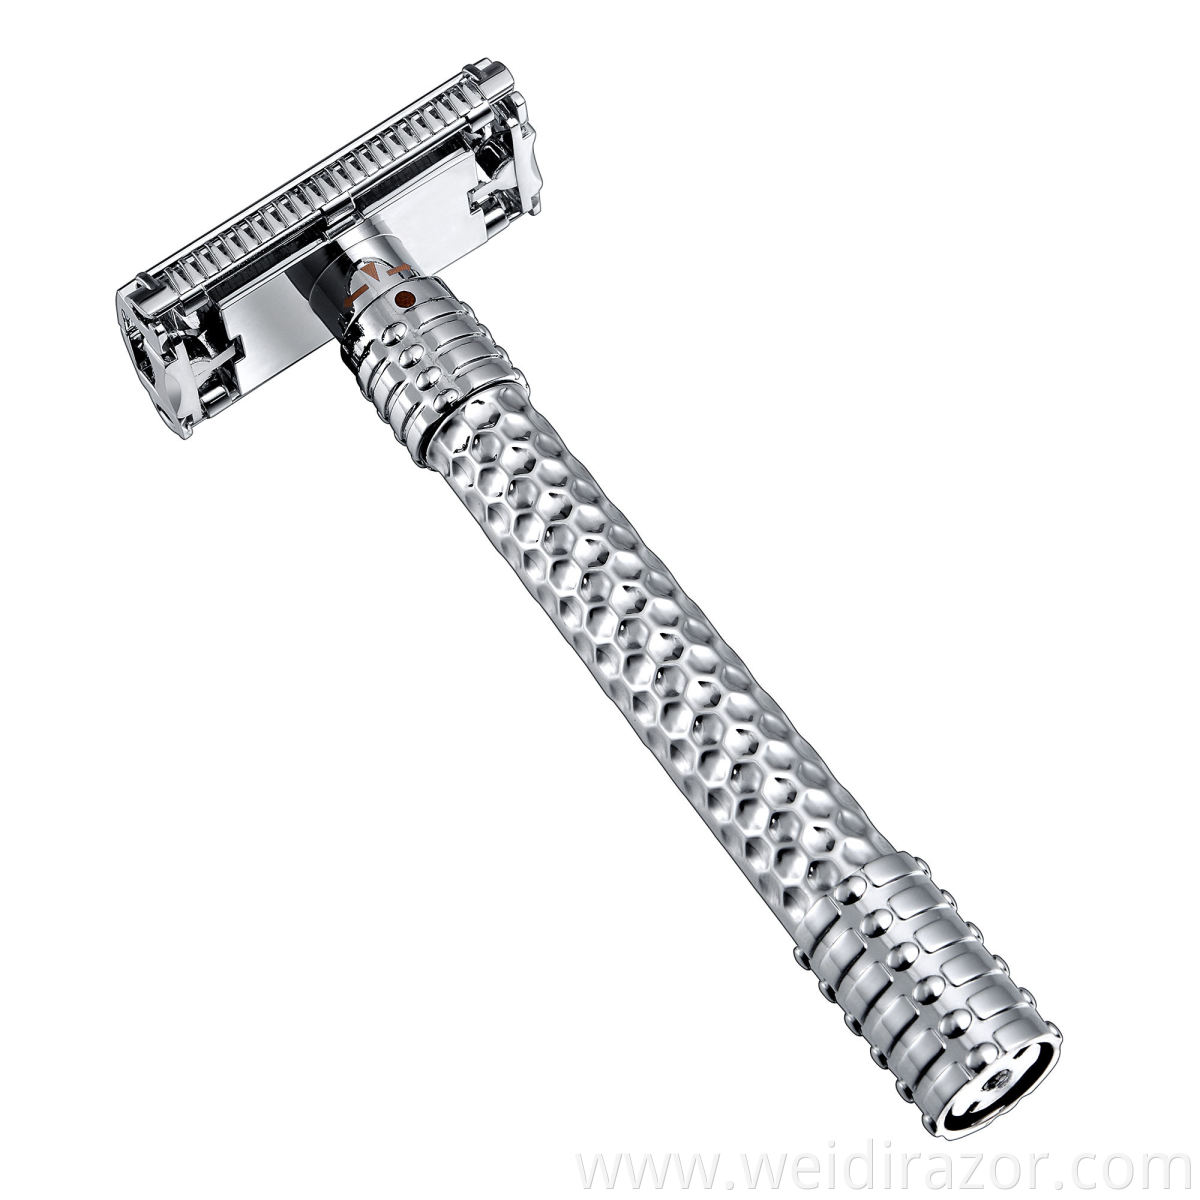 Best Razor Blade Private Label Branded Double Edge Safety Razor and Blade